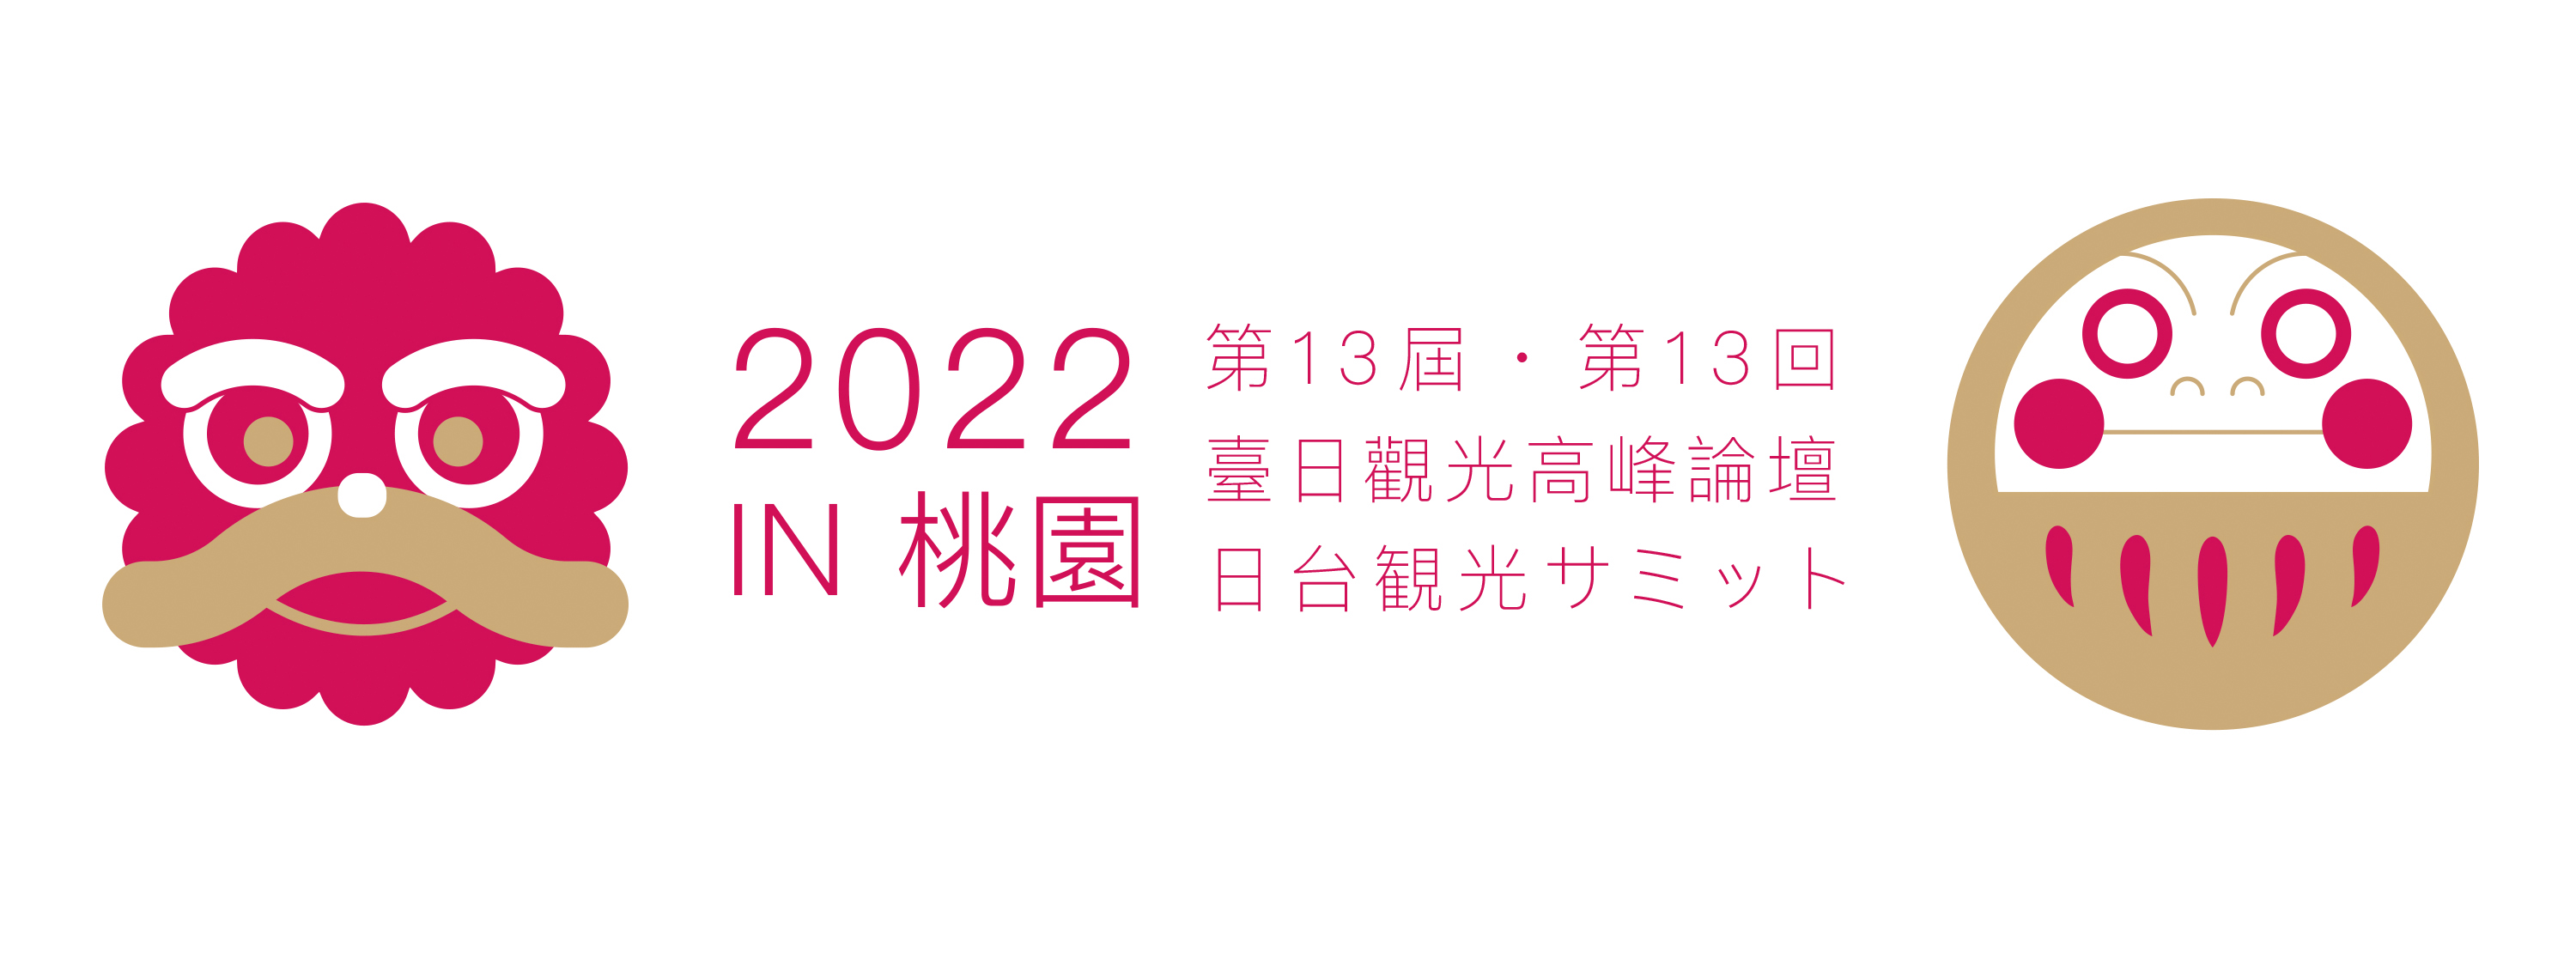 2022 IN 桃園